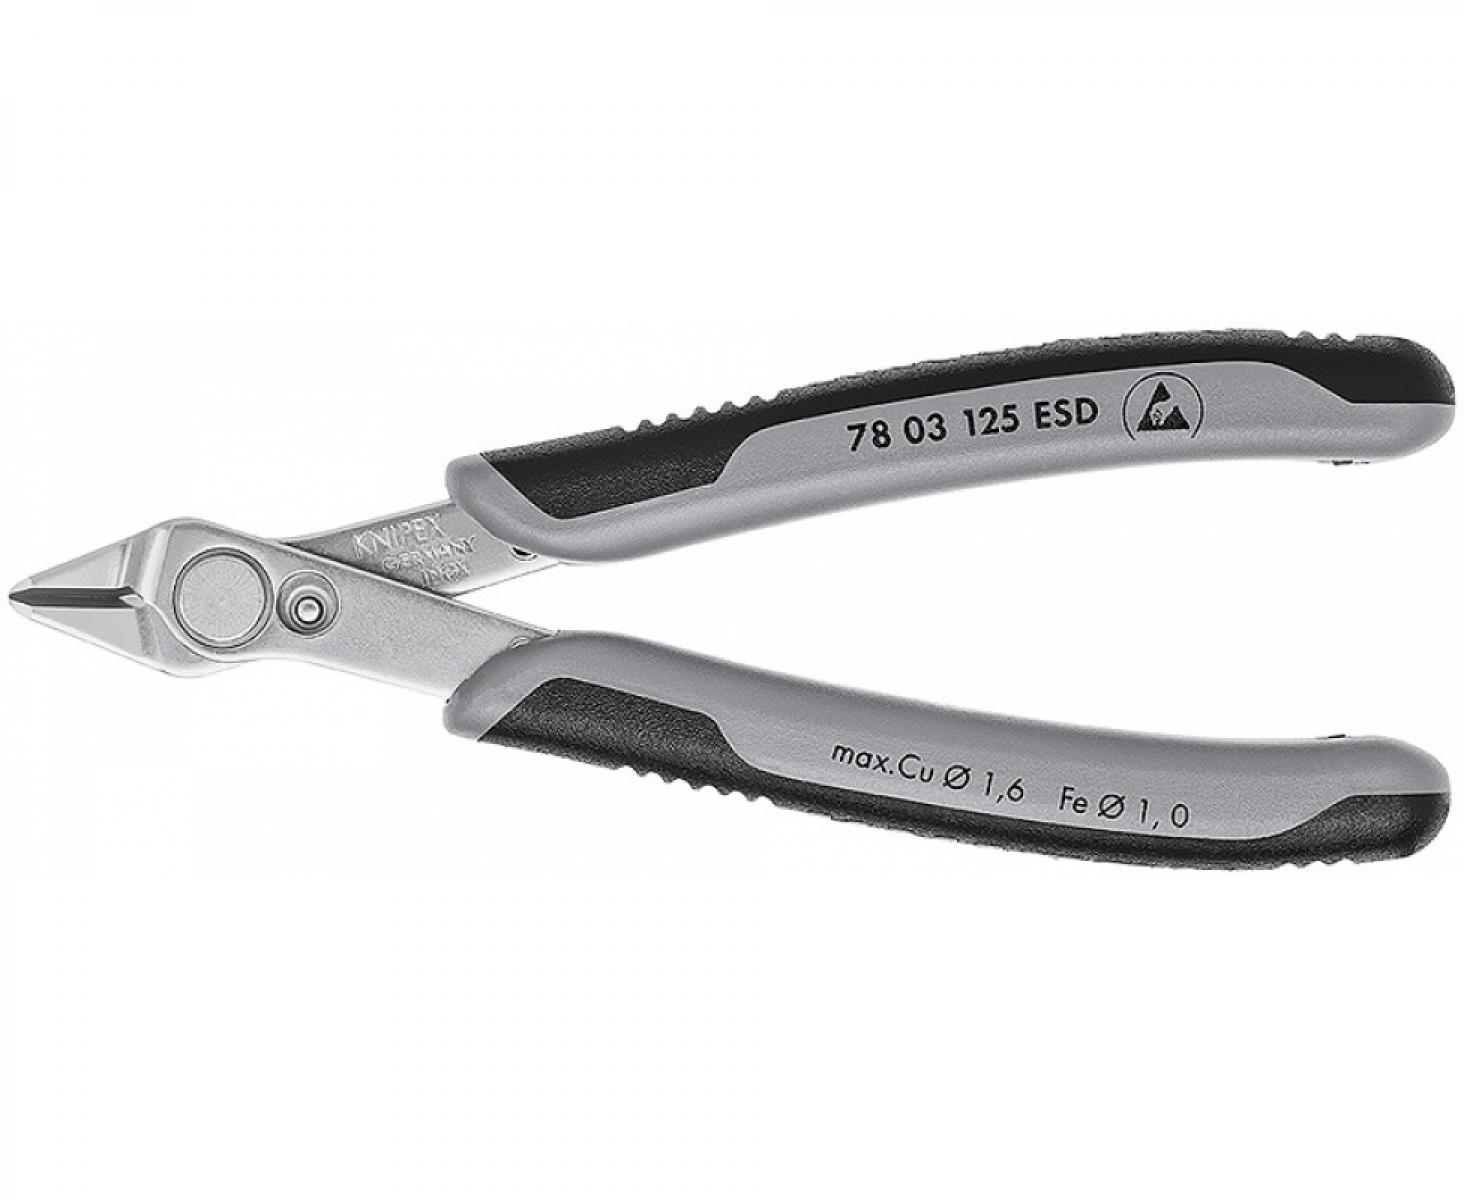 Electronic Super Knips ESD Knipex KN-7803125ESD